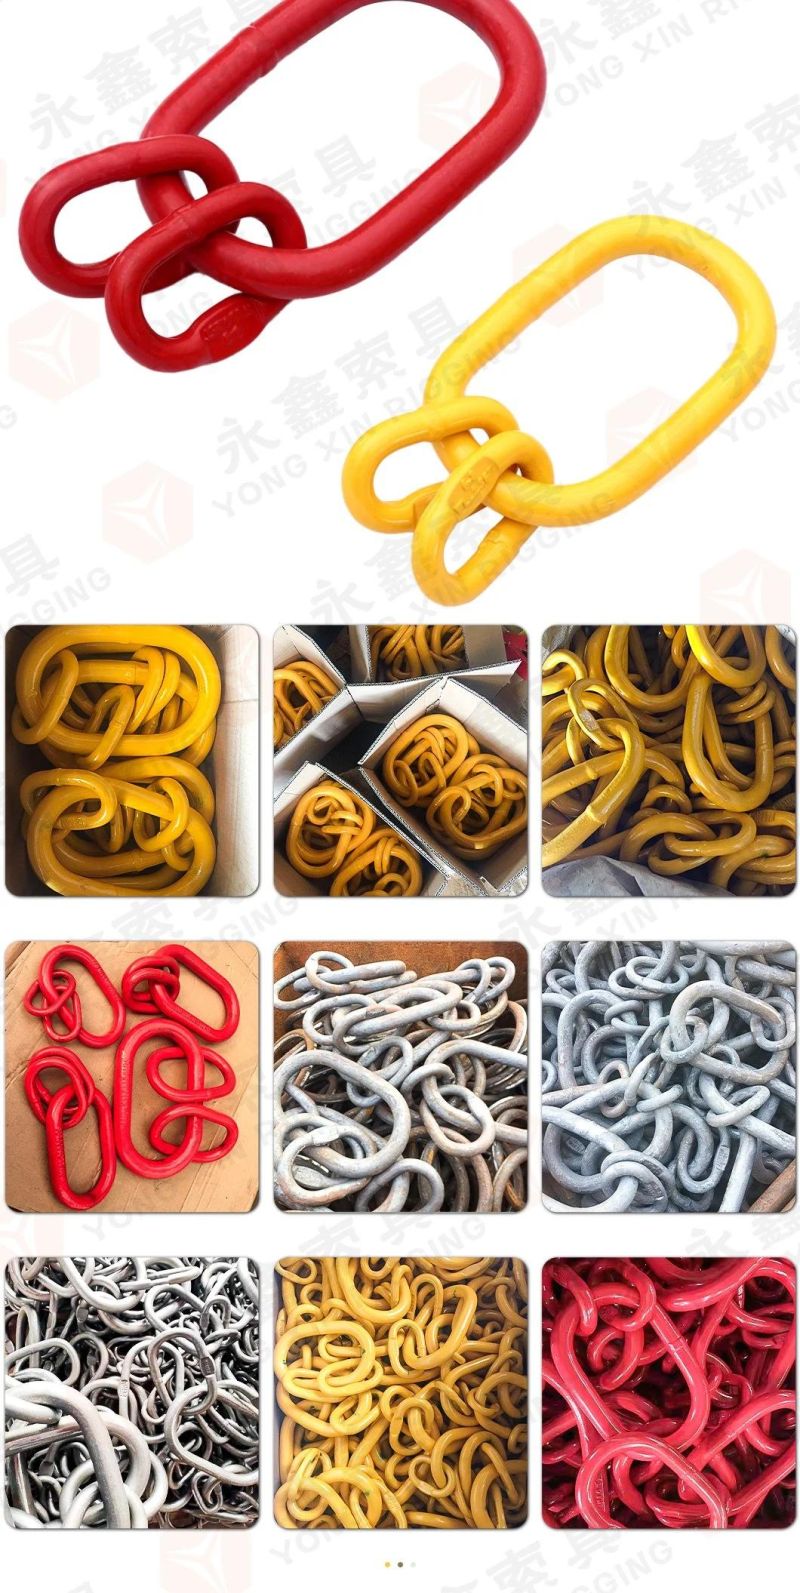 Hot Sale G80 Rigging Hardware Alloy Steel Drop Forged Us A345 Lifting Blong Master Link